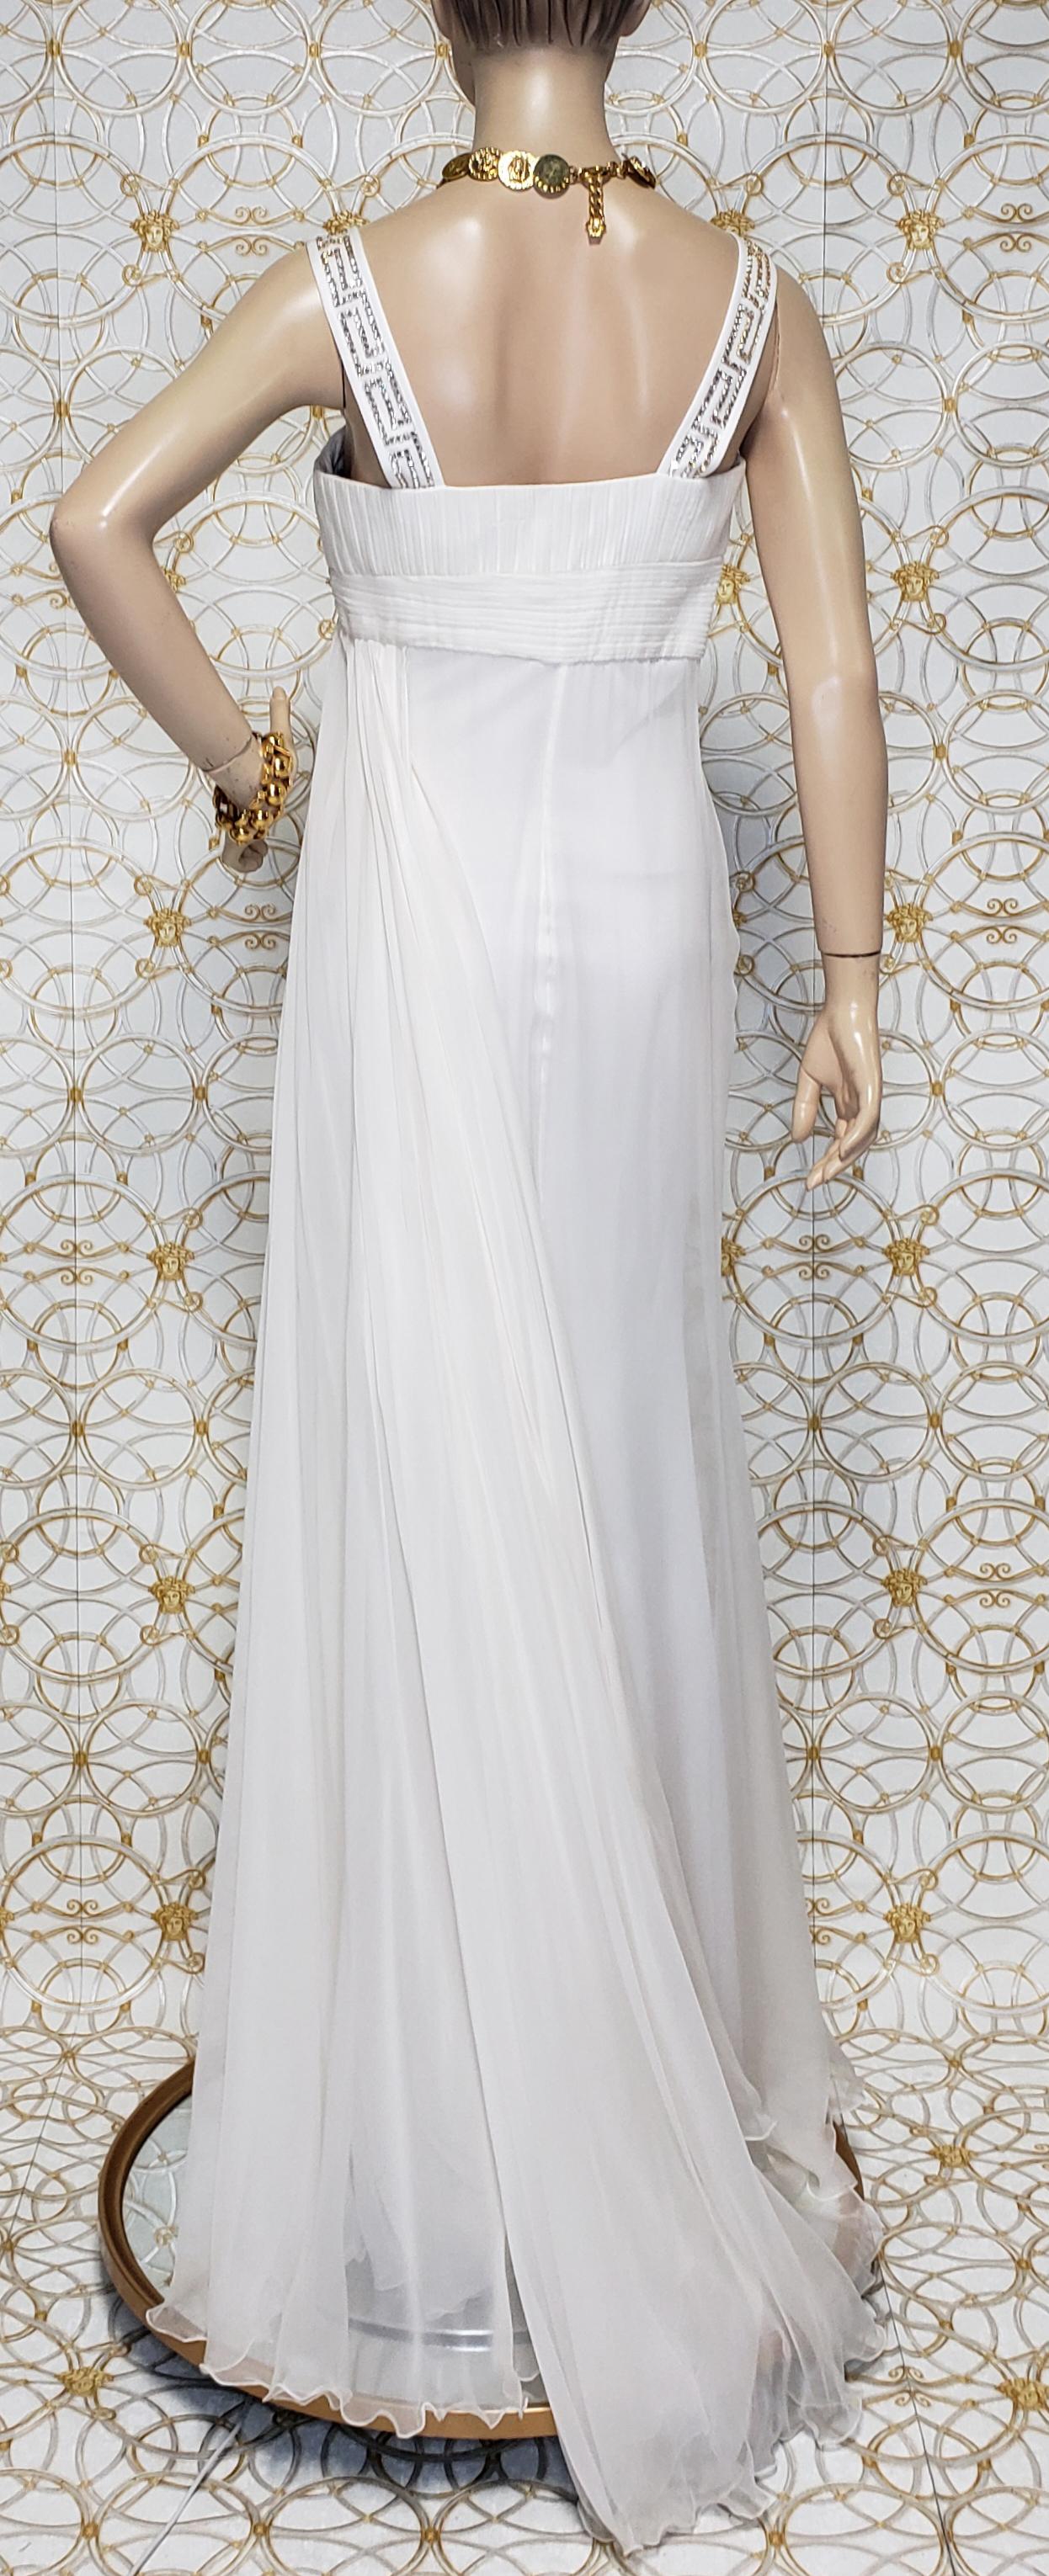 New Versace Crystal Embellished White Silk Gown 44 - 8 For Sale 4